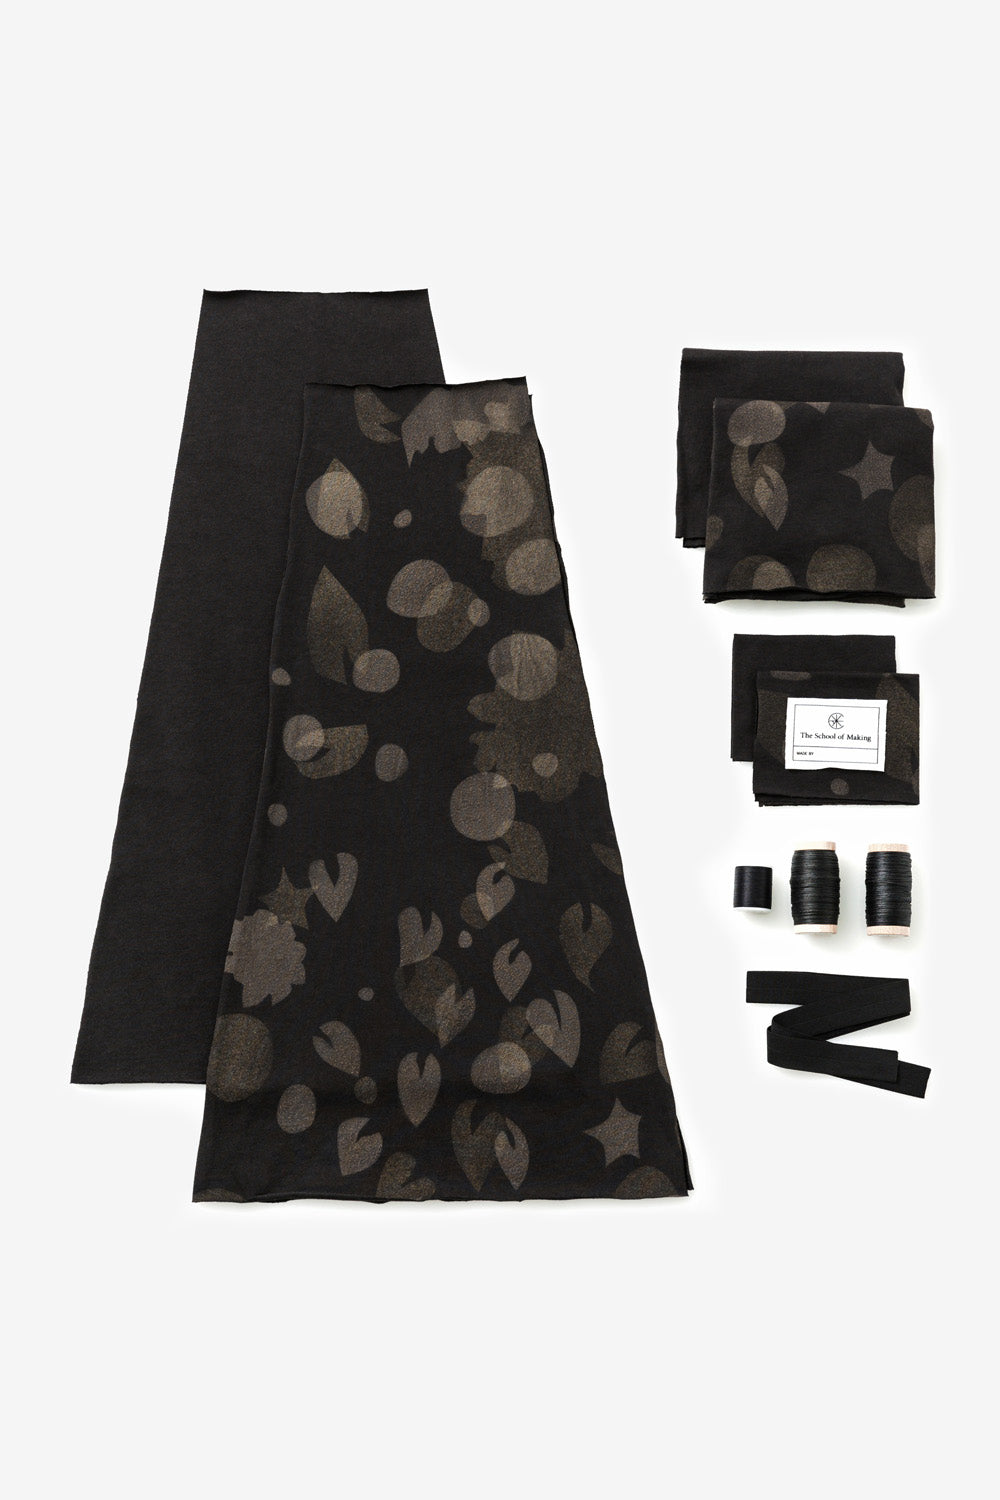 The School of Making Embroidered Swing Skirt Kit in Black with Canopy Stencil. Image shows hand-cut fabric pieces, thread, embroidery floss, binding, and a label.